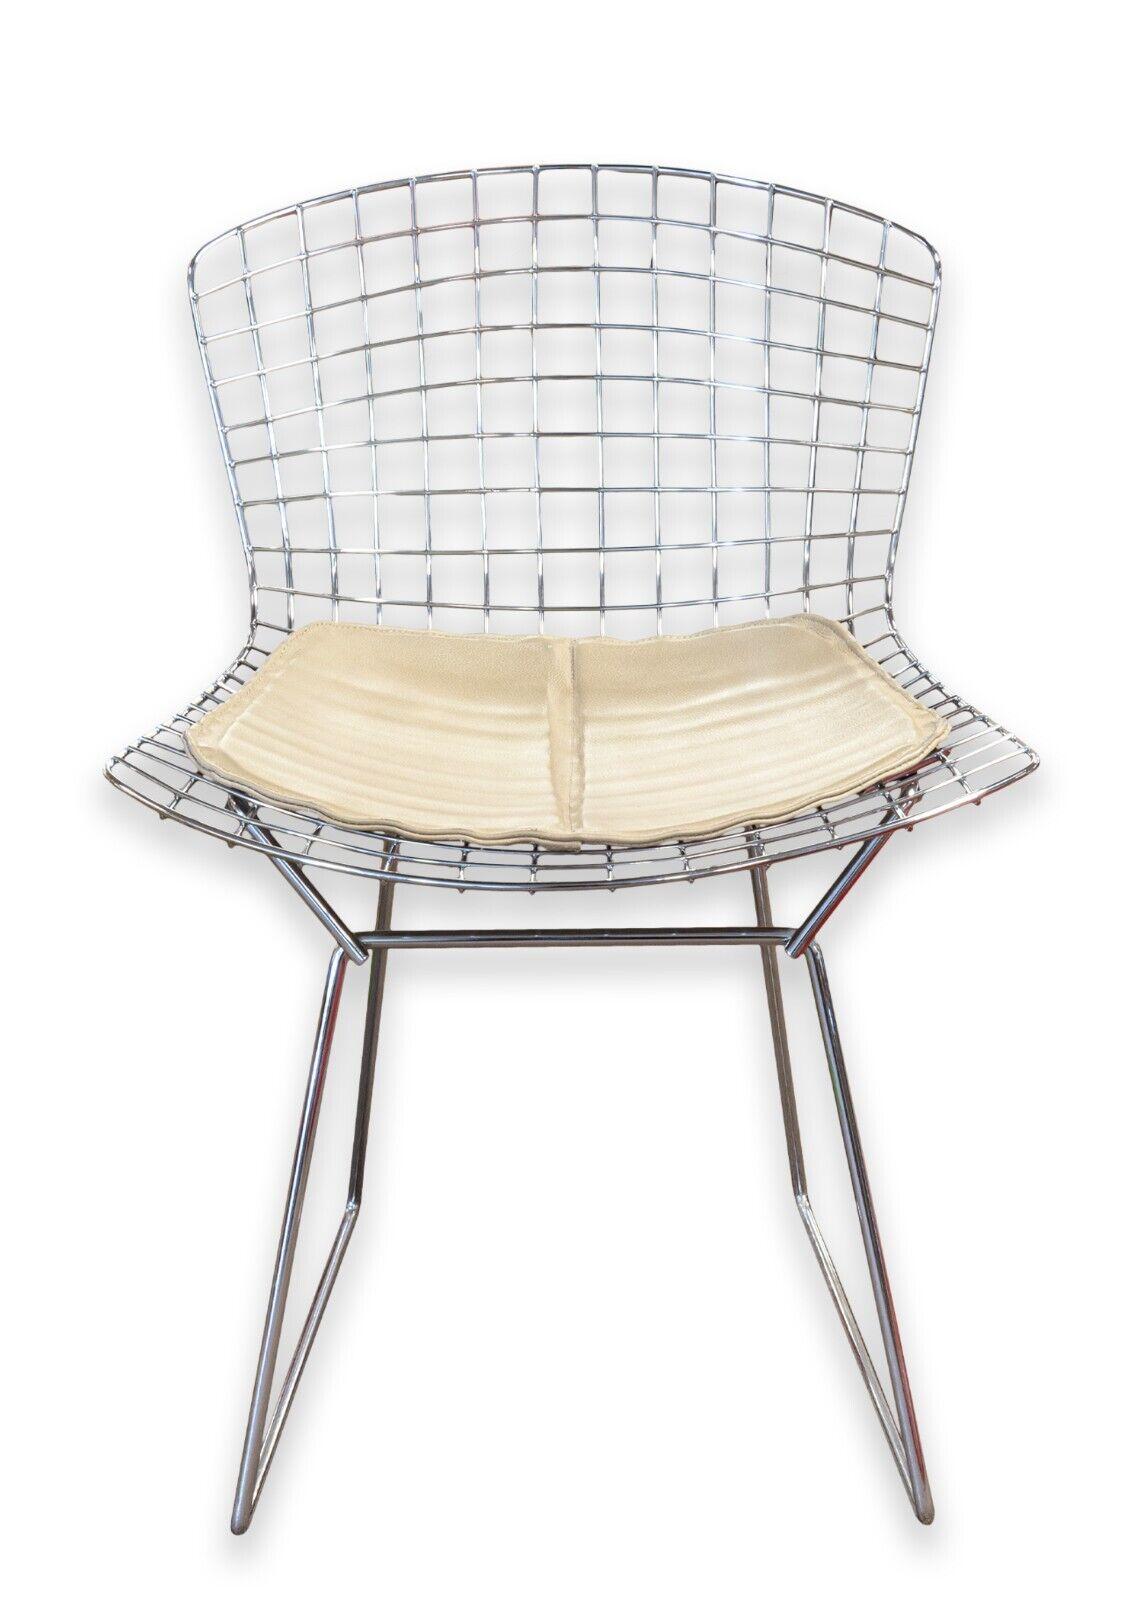 A set of 6 Harry Bertoia for Knoll wire side chairs. A wonderful set of clean, chic Bertoia wire side chairs featuring lovely beige leather seat pads, chrome wire construction, and a timeless mid century design. These 6 chair are in very good